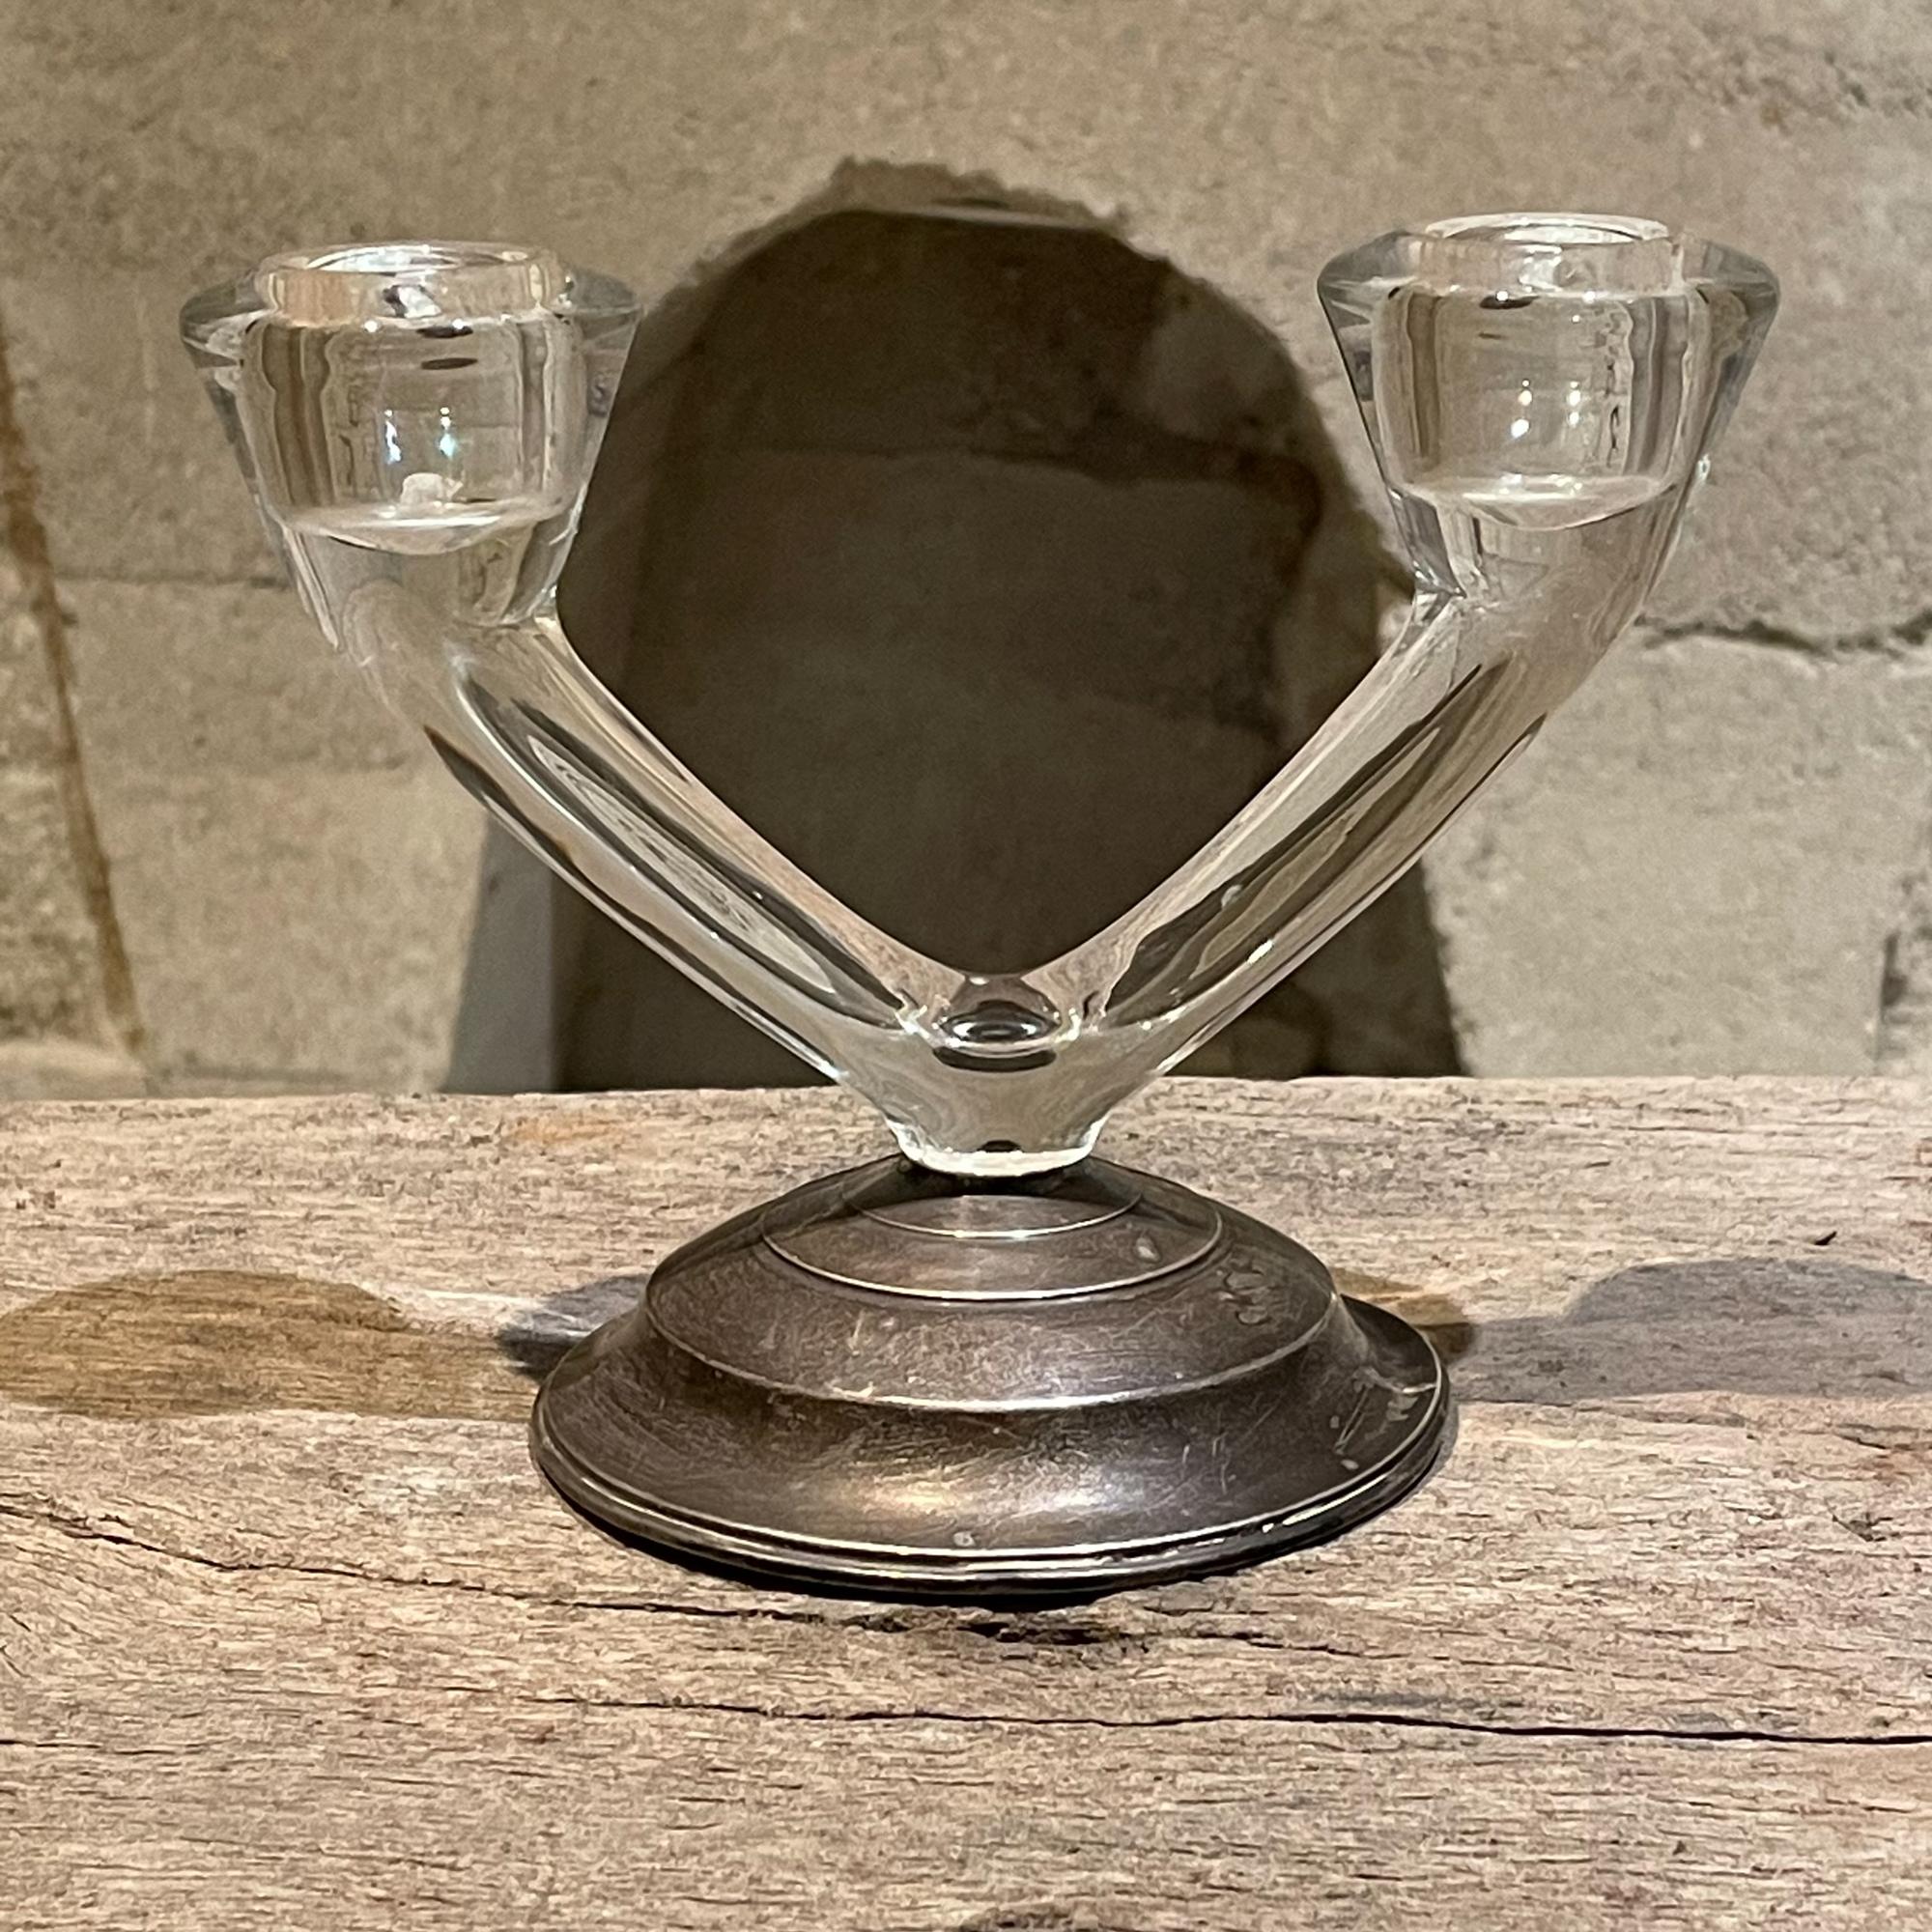 
Vintage Regency Two Arm Sterling Silver and Glass Candle Holder Candelabra by W M Rogers.
The base is made of sterling silver top section is made of glass.
Made in the USA 1960s.
5H x 6.25 W x 4 D.
Original vintage unrestored condition. Vintage